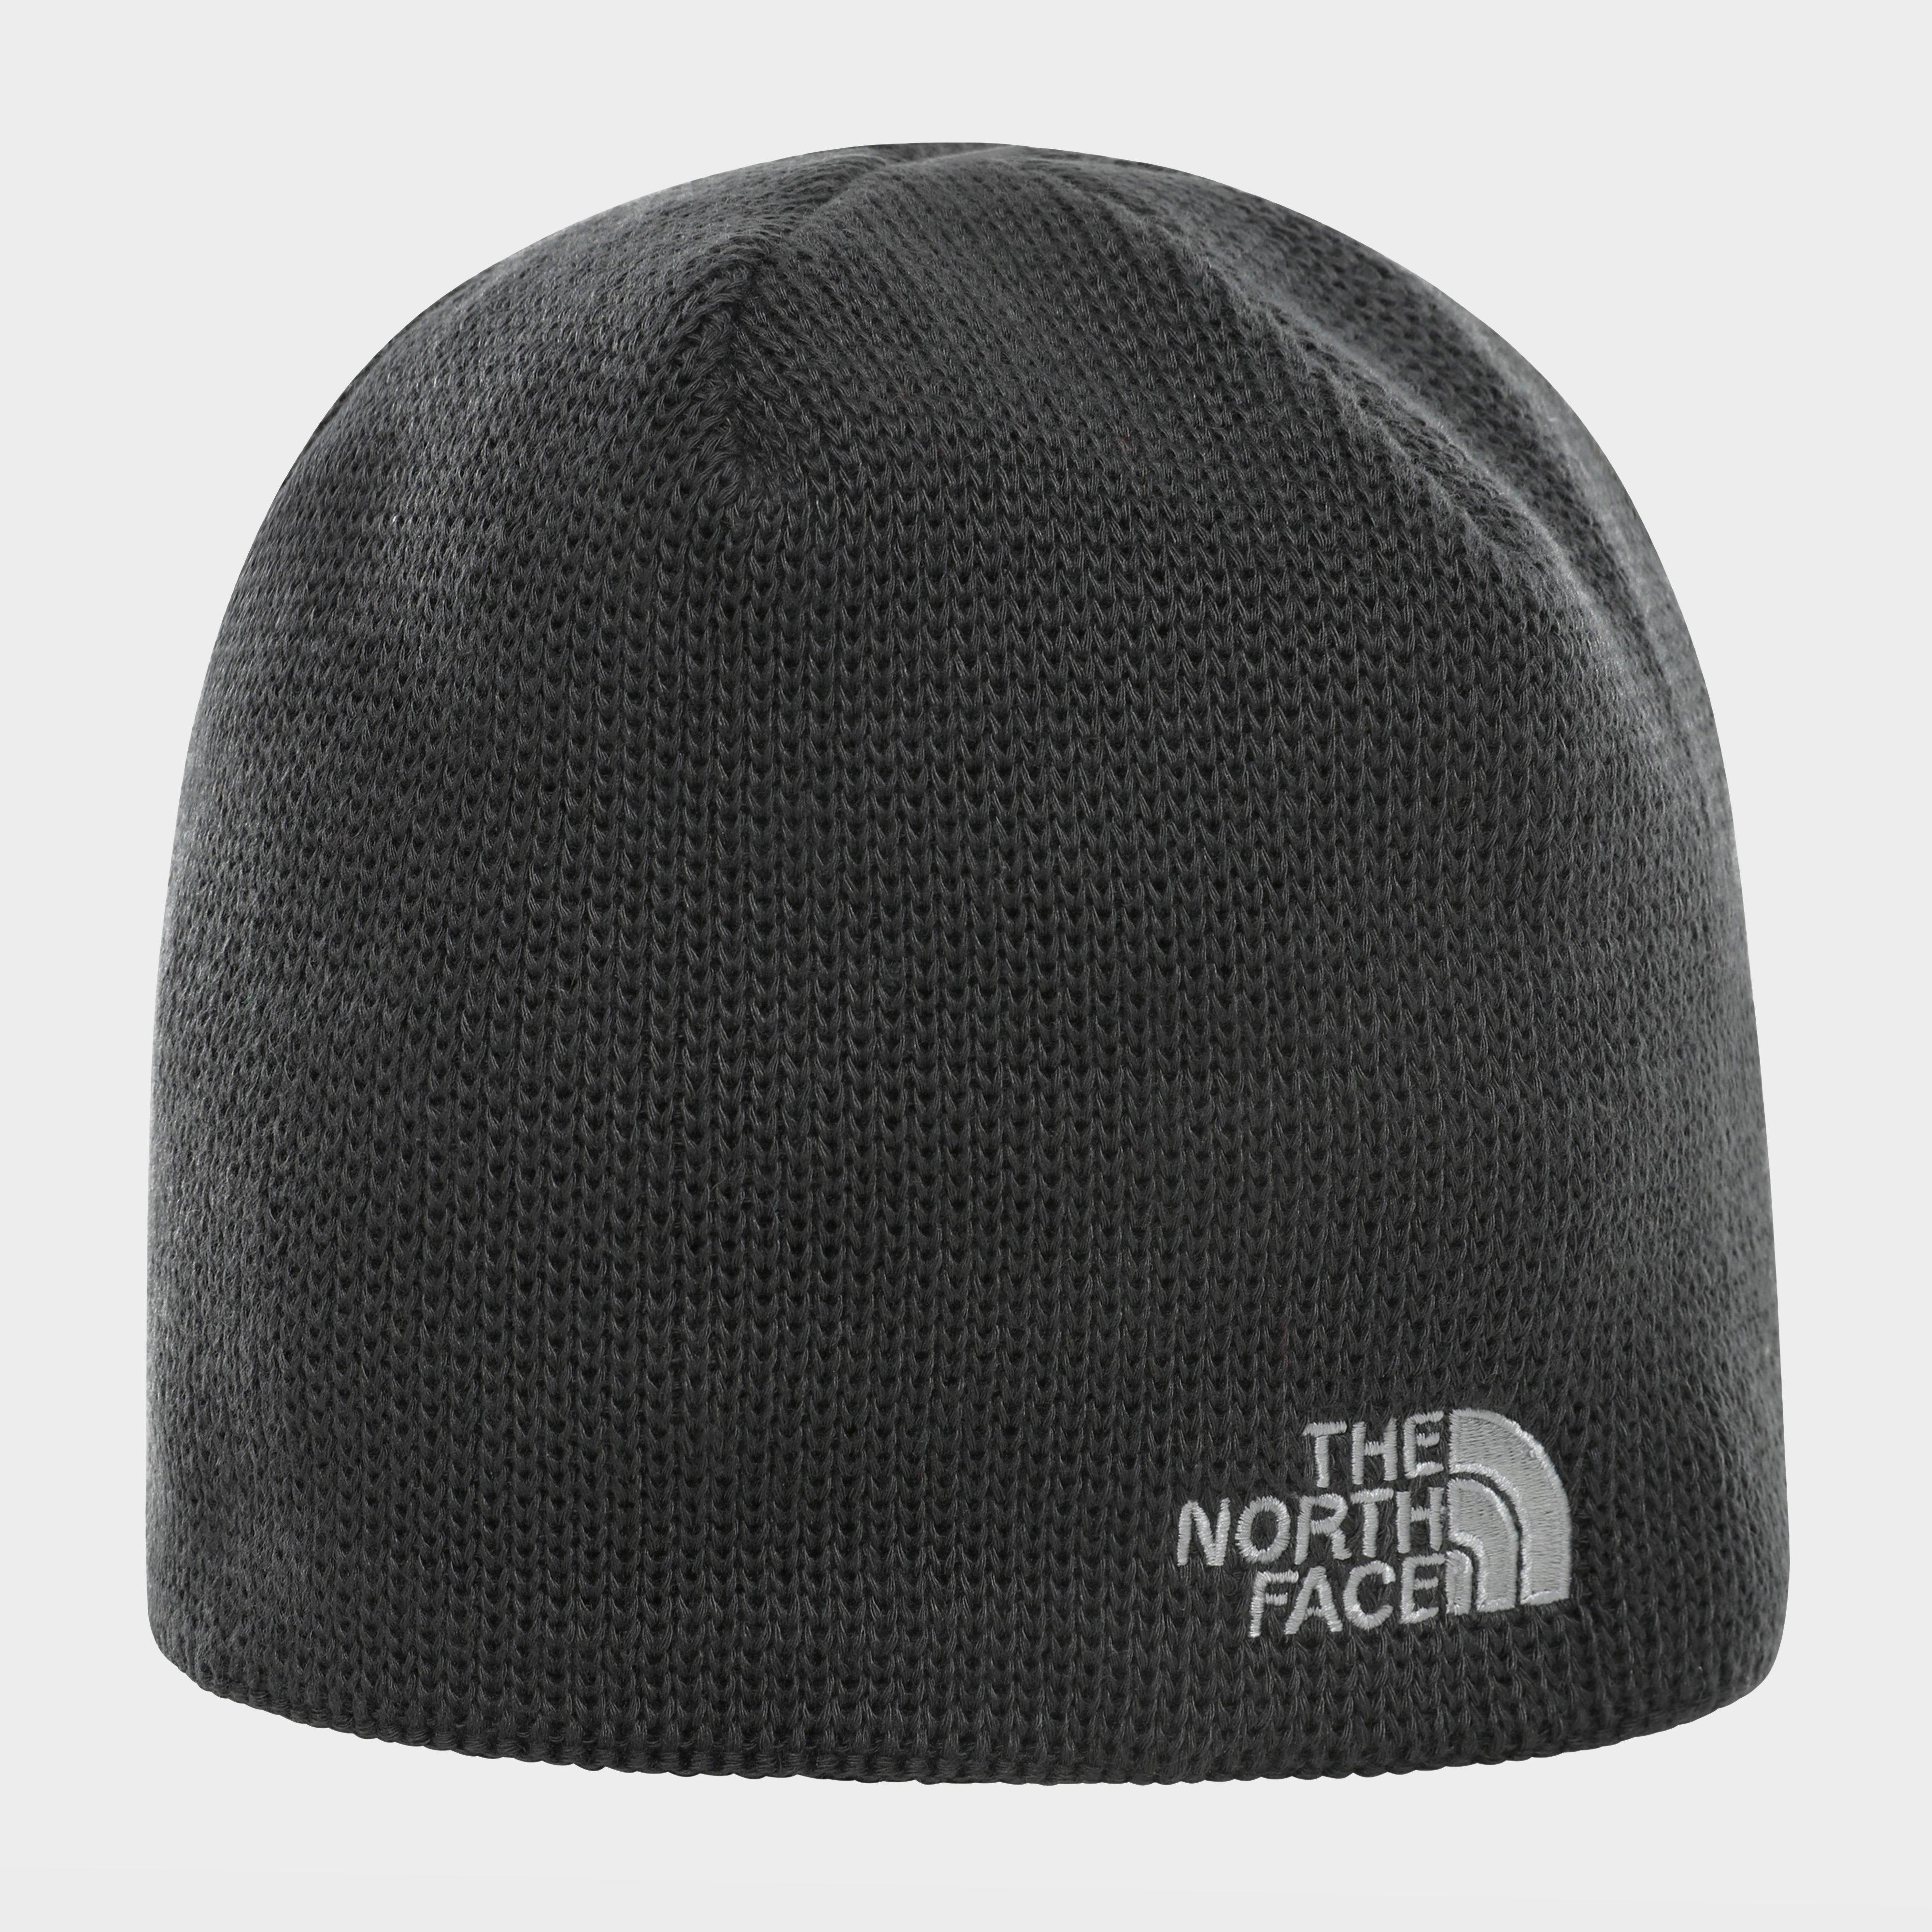 The North Face Men's Recycled Beanie 